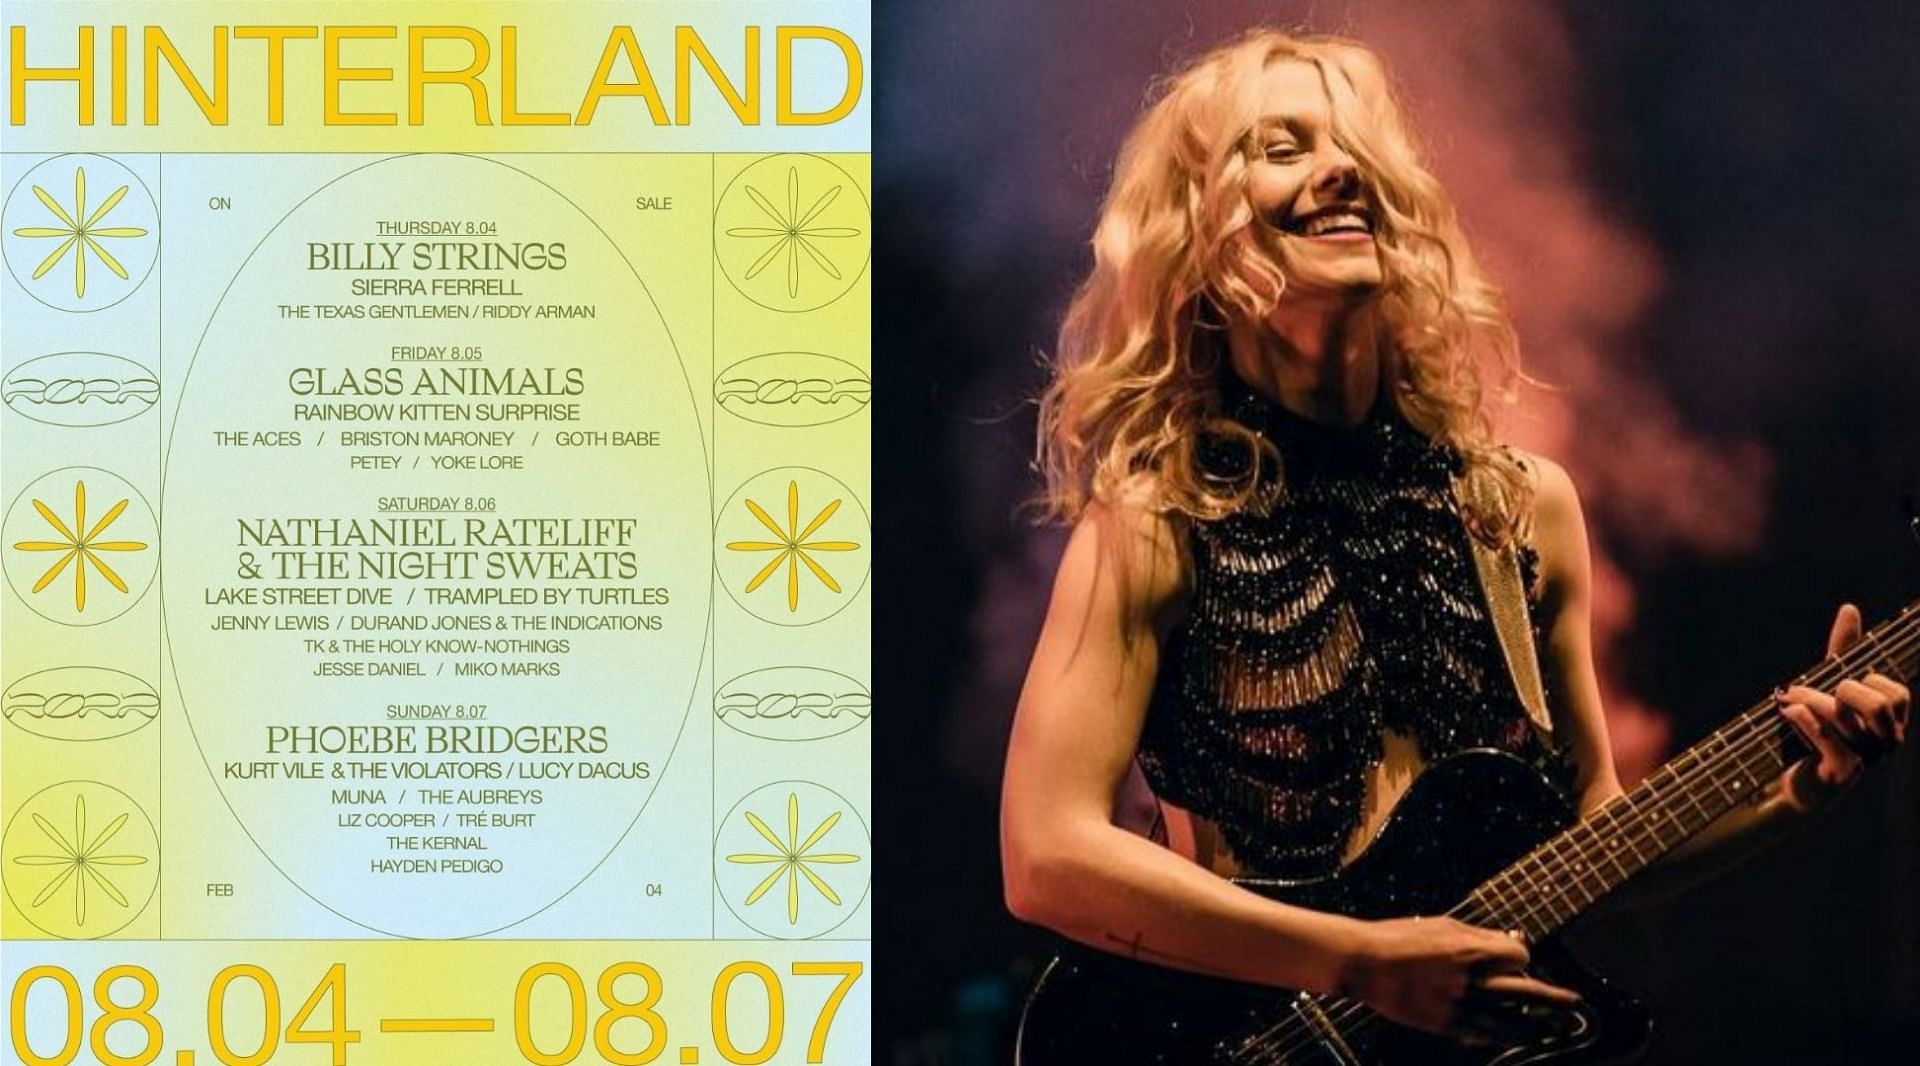 The Hinterland festival is set to be an expanded, four-day affair spanning August 4-7 (Images via Instagram @hinterlandiowa, @phoebebridgers)